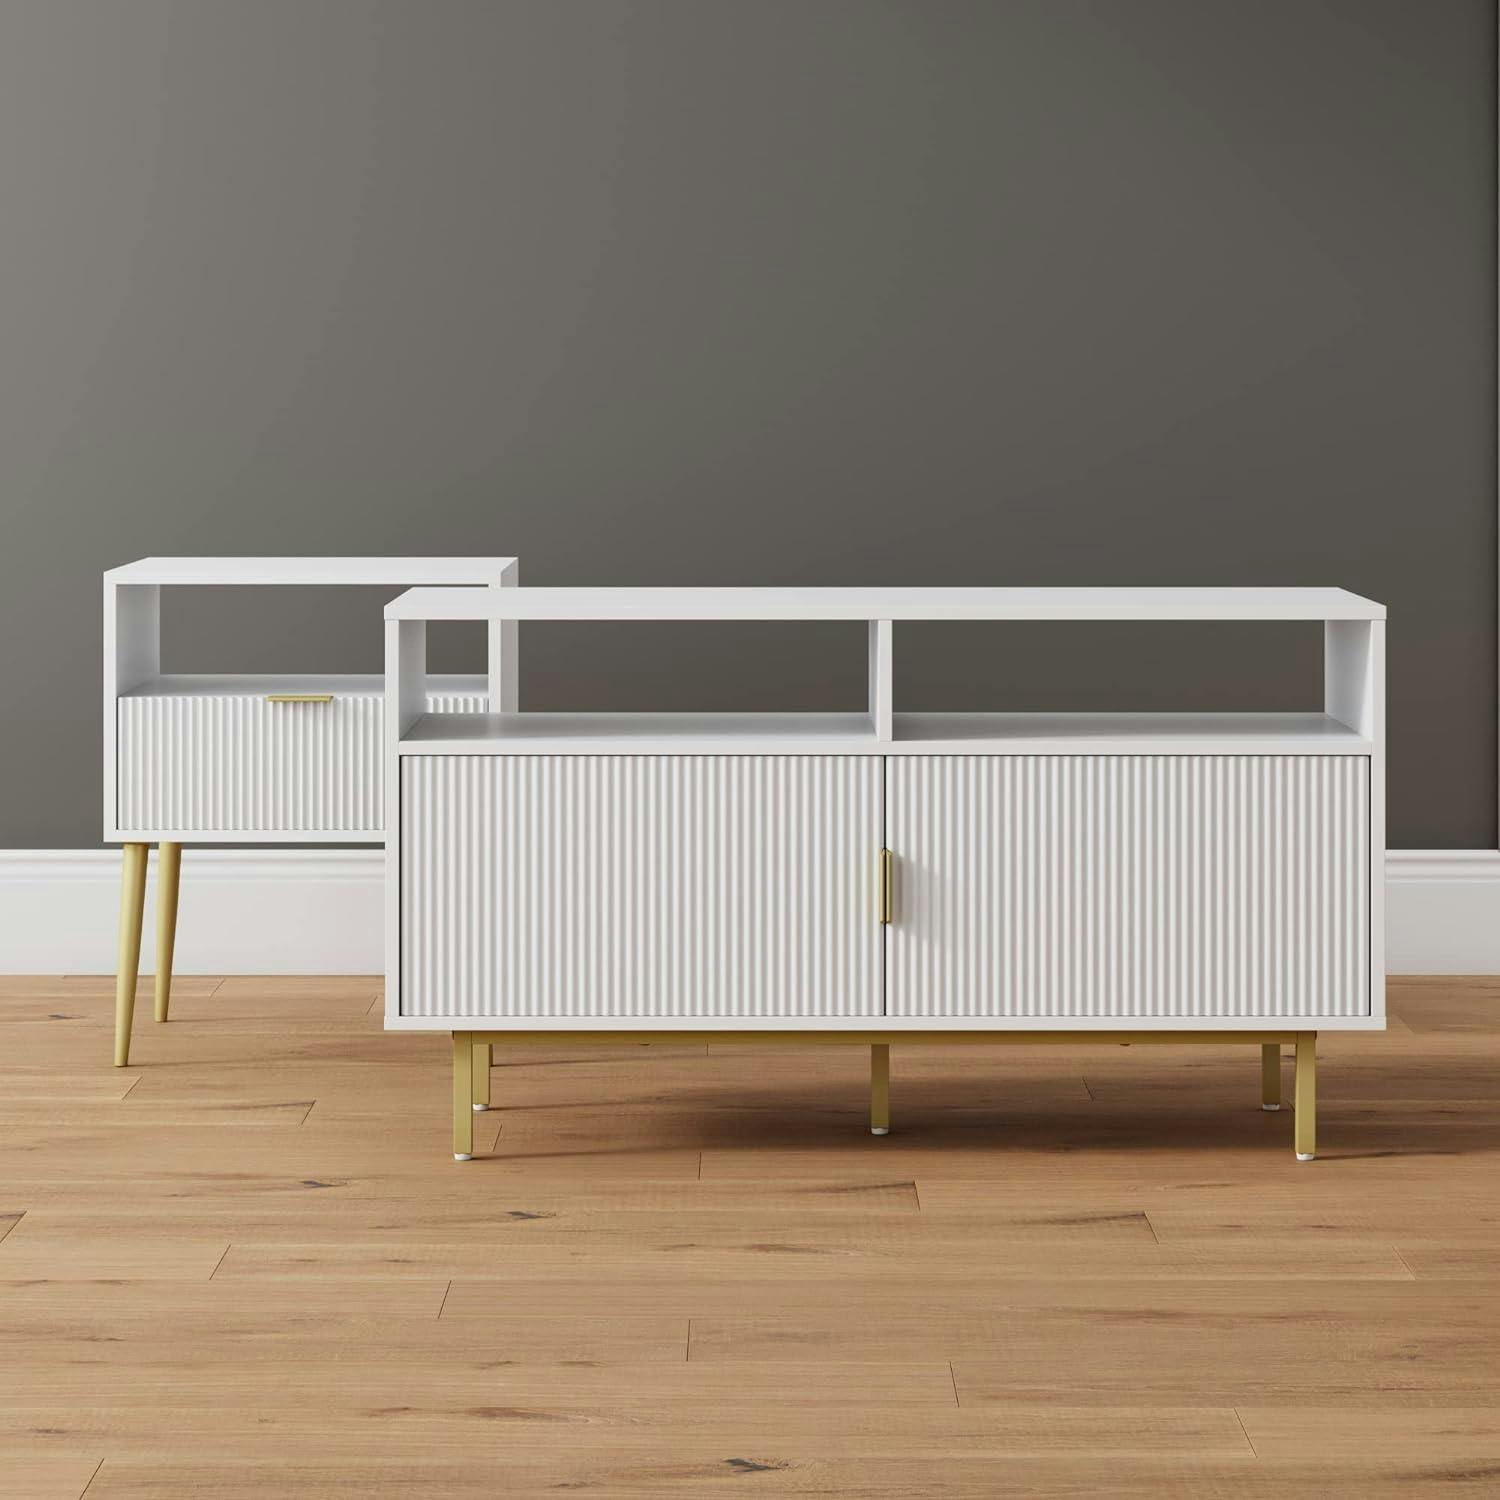 Jacklyn White Fluted 50" Mid-Century Media Unit with Gold Accents